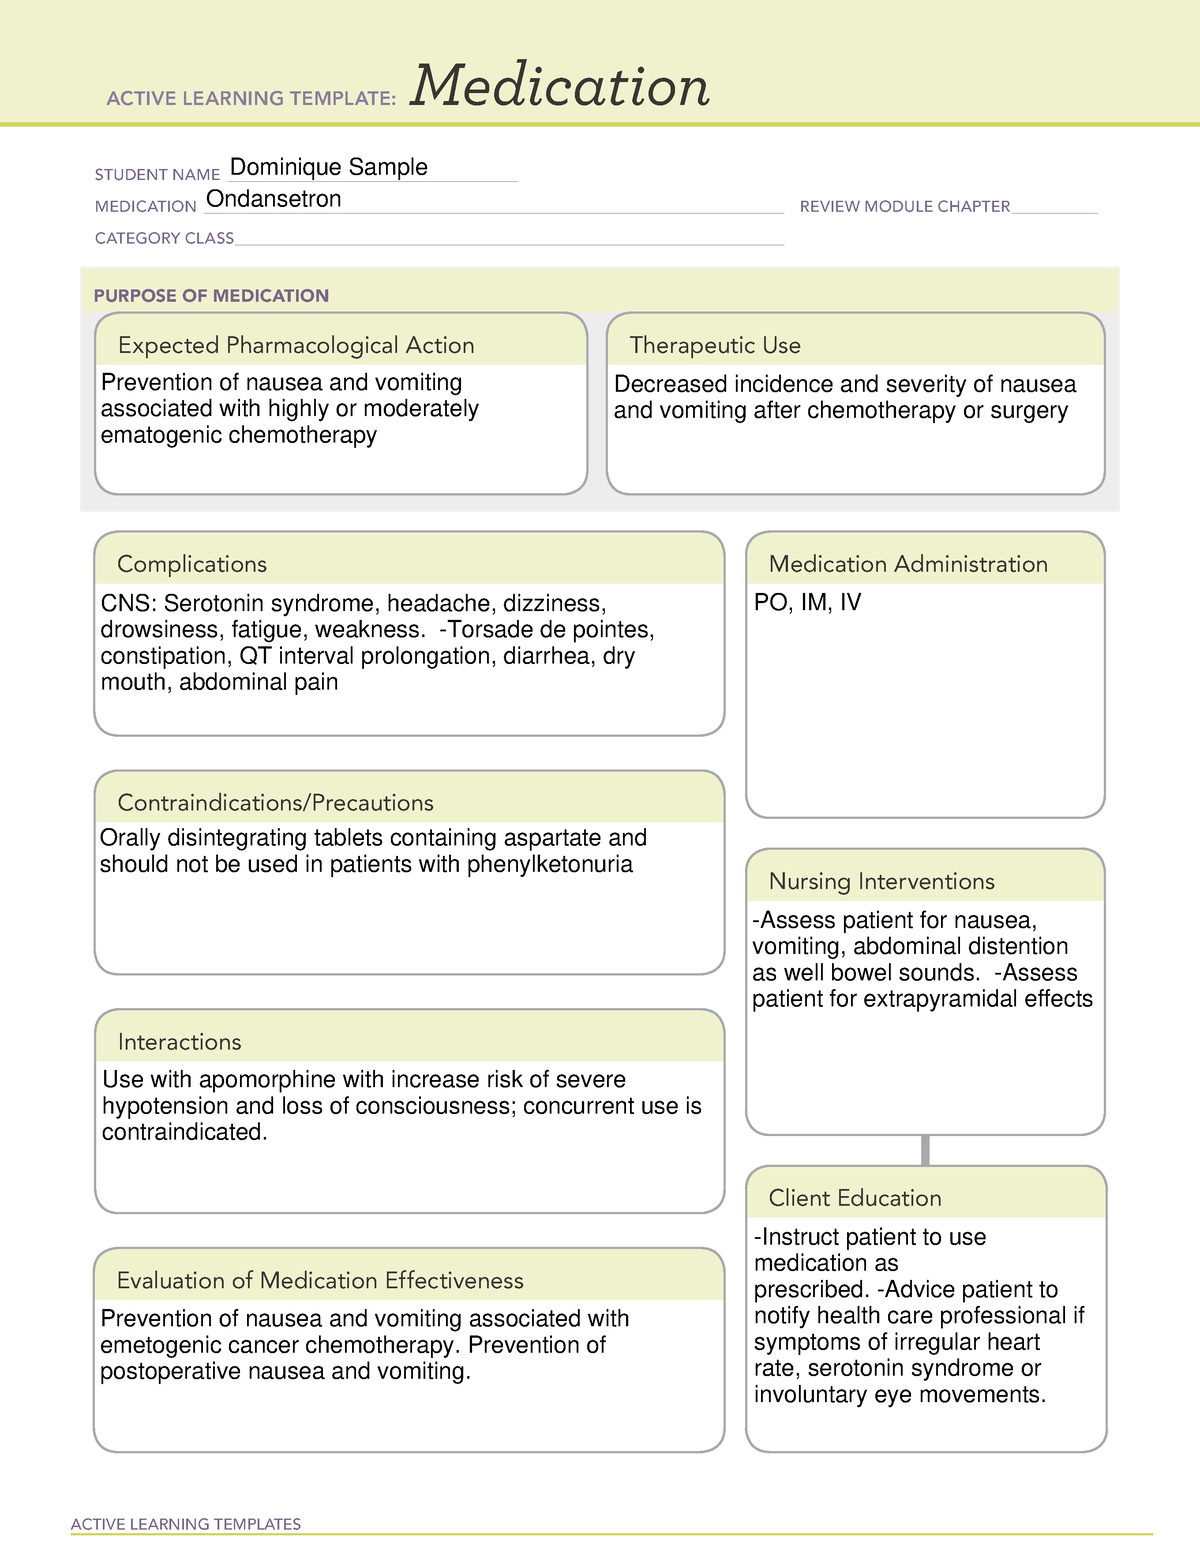 Ondansetron Active Learning Template ACTIVE LEARNING TEMPLATES